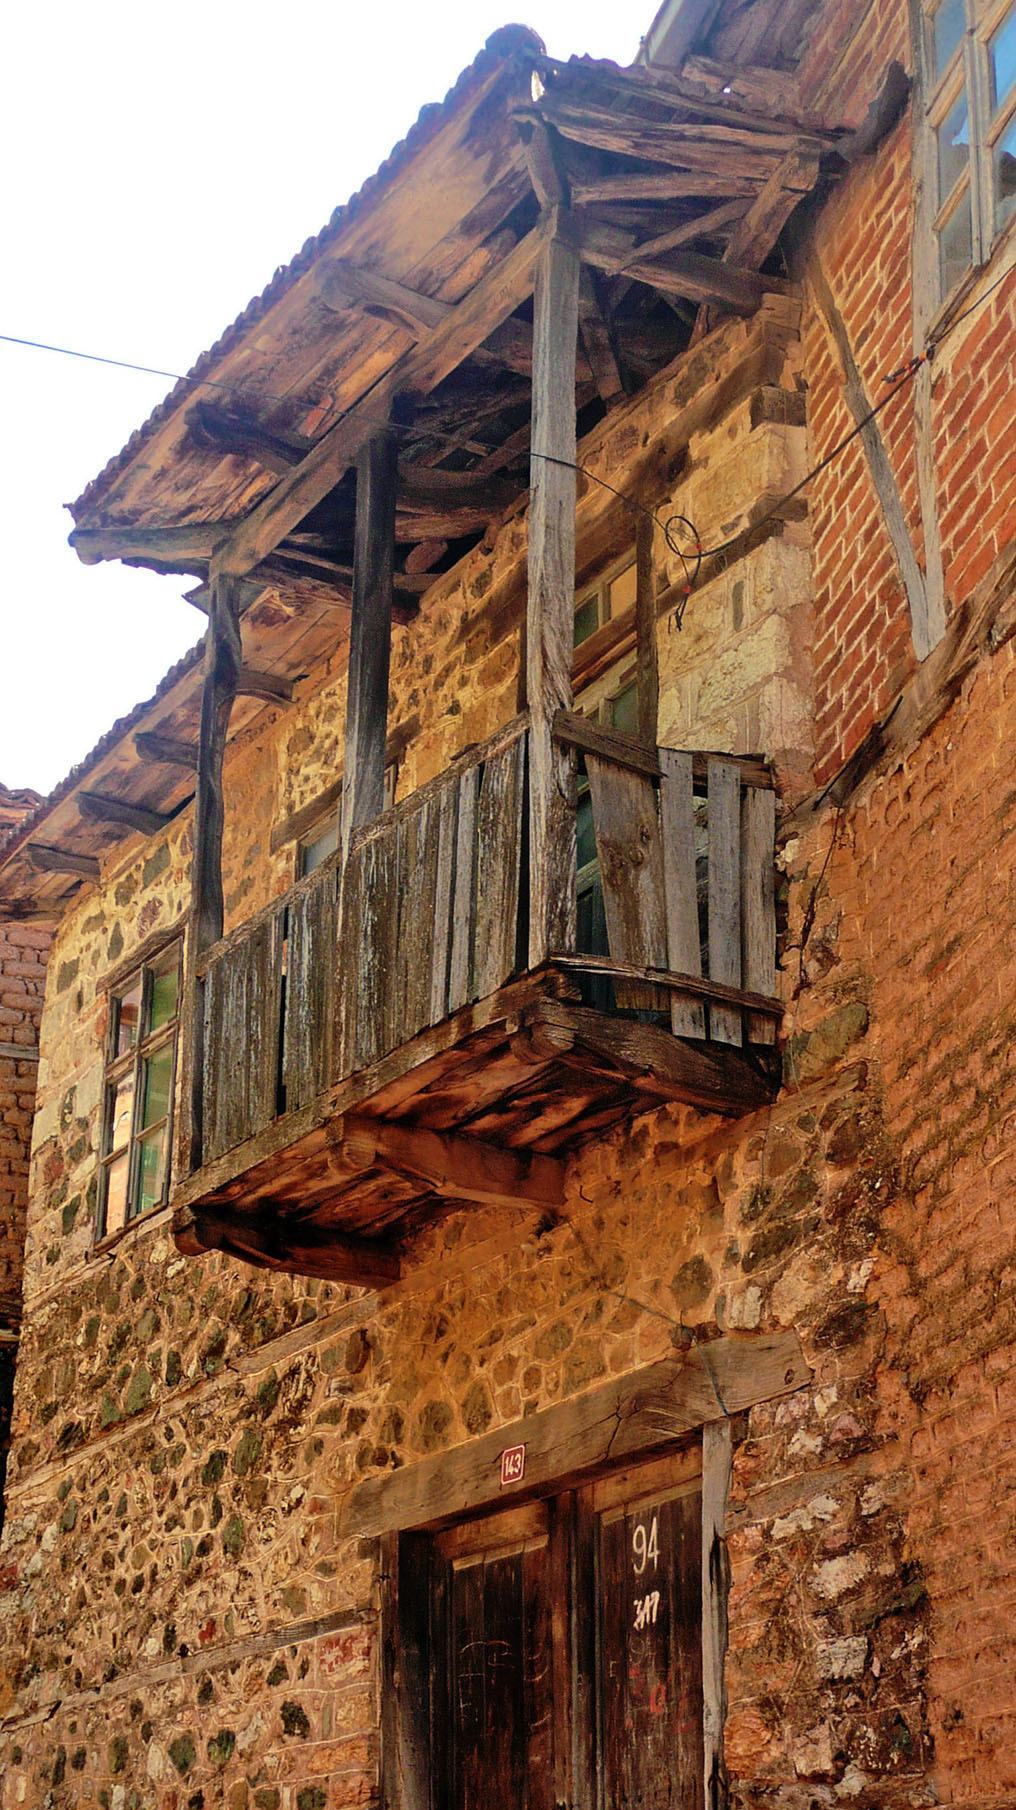 An old building with a wooden verandah in Vevcani North Macedonia